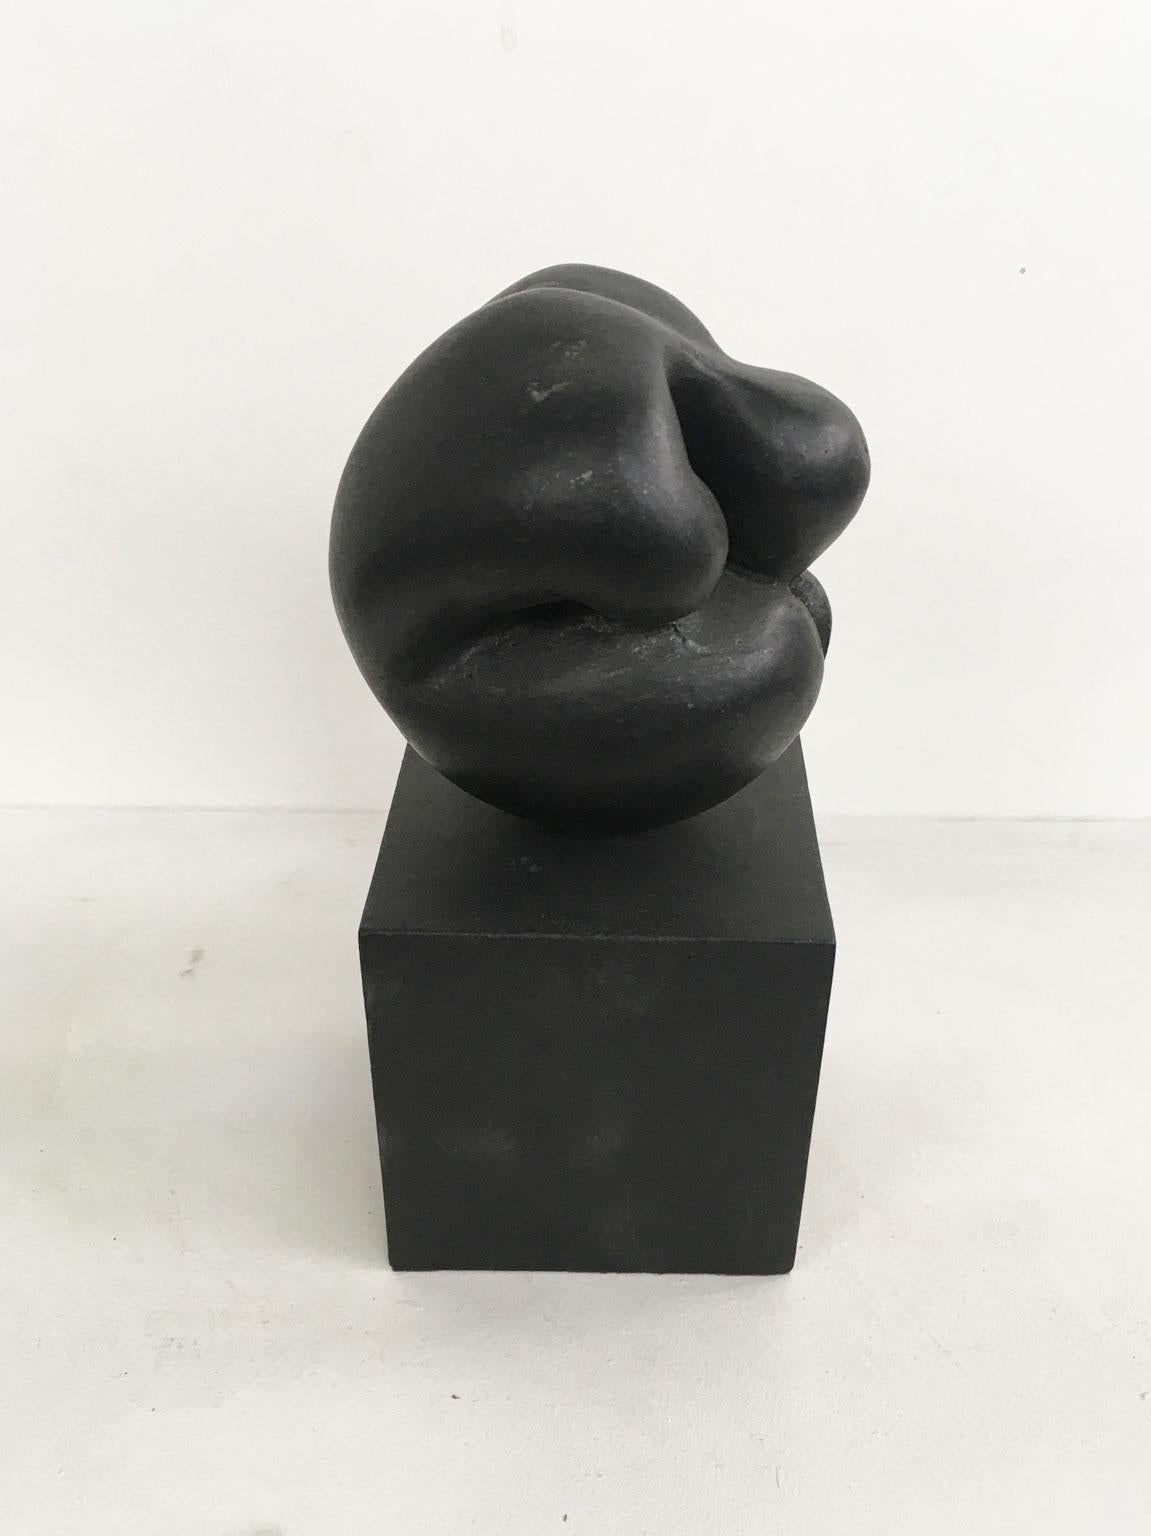 1988 Italy Black Aluminum Abstract Sculpture by Patrizia Guerresi Title Deji For Sale 7